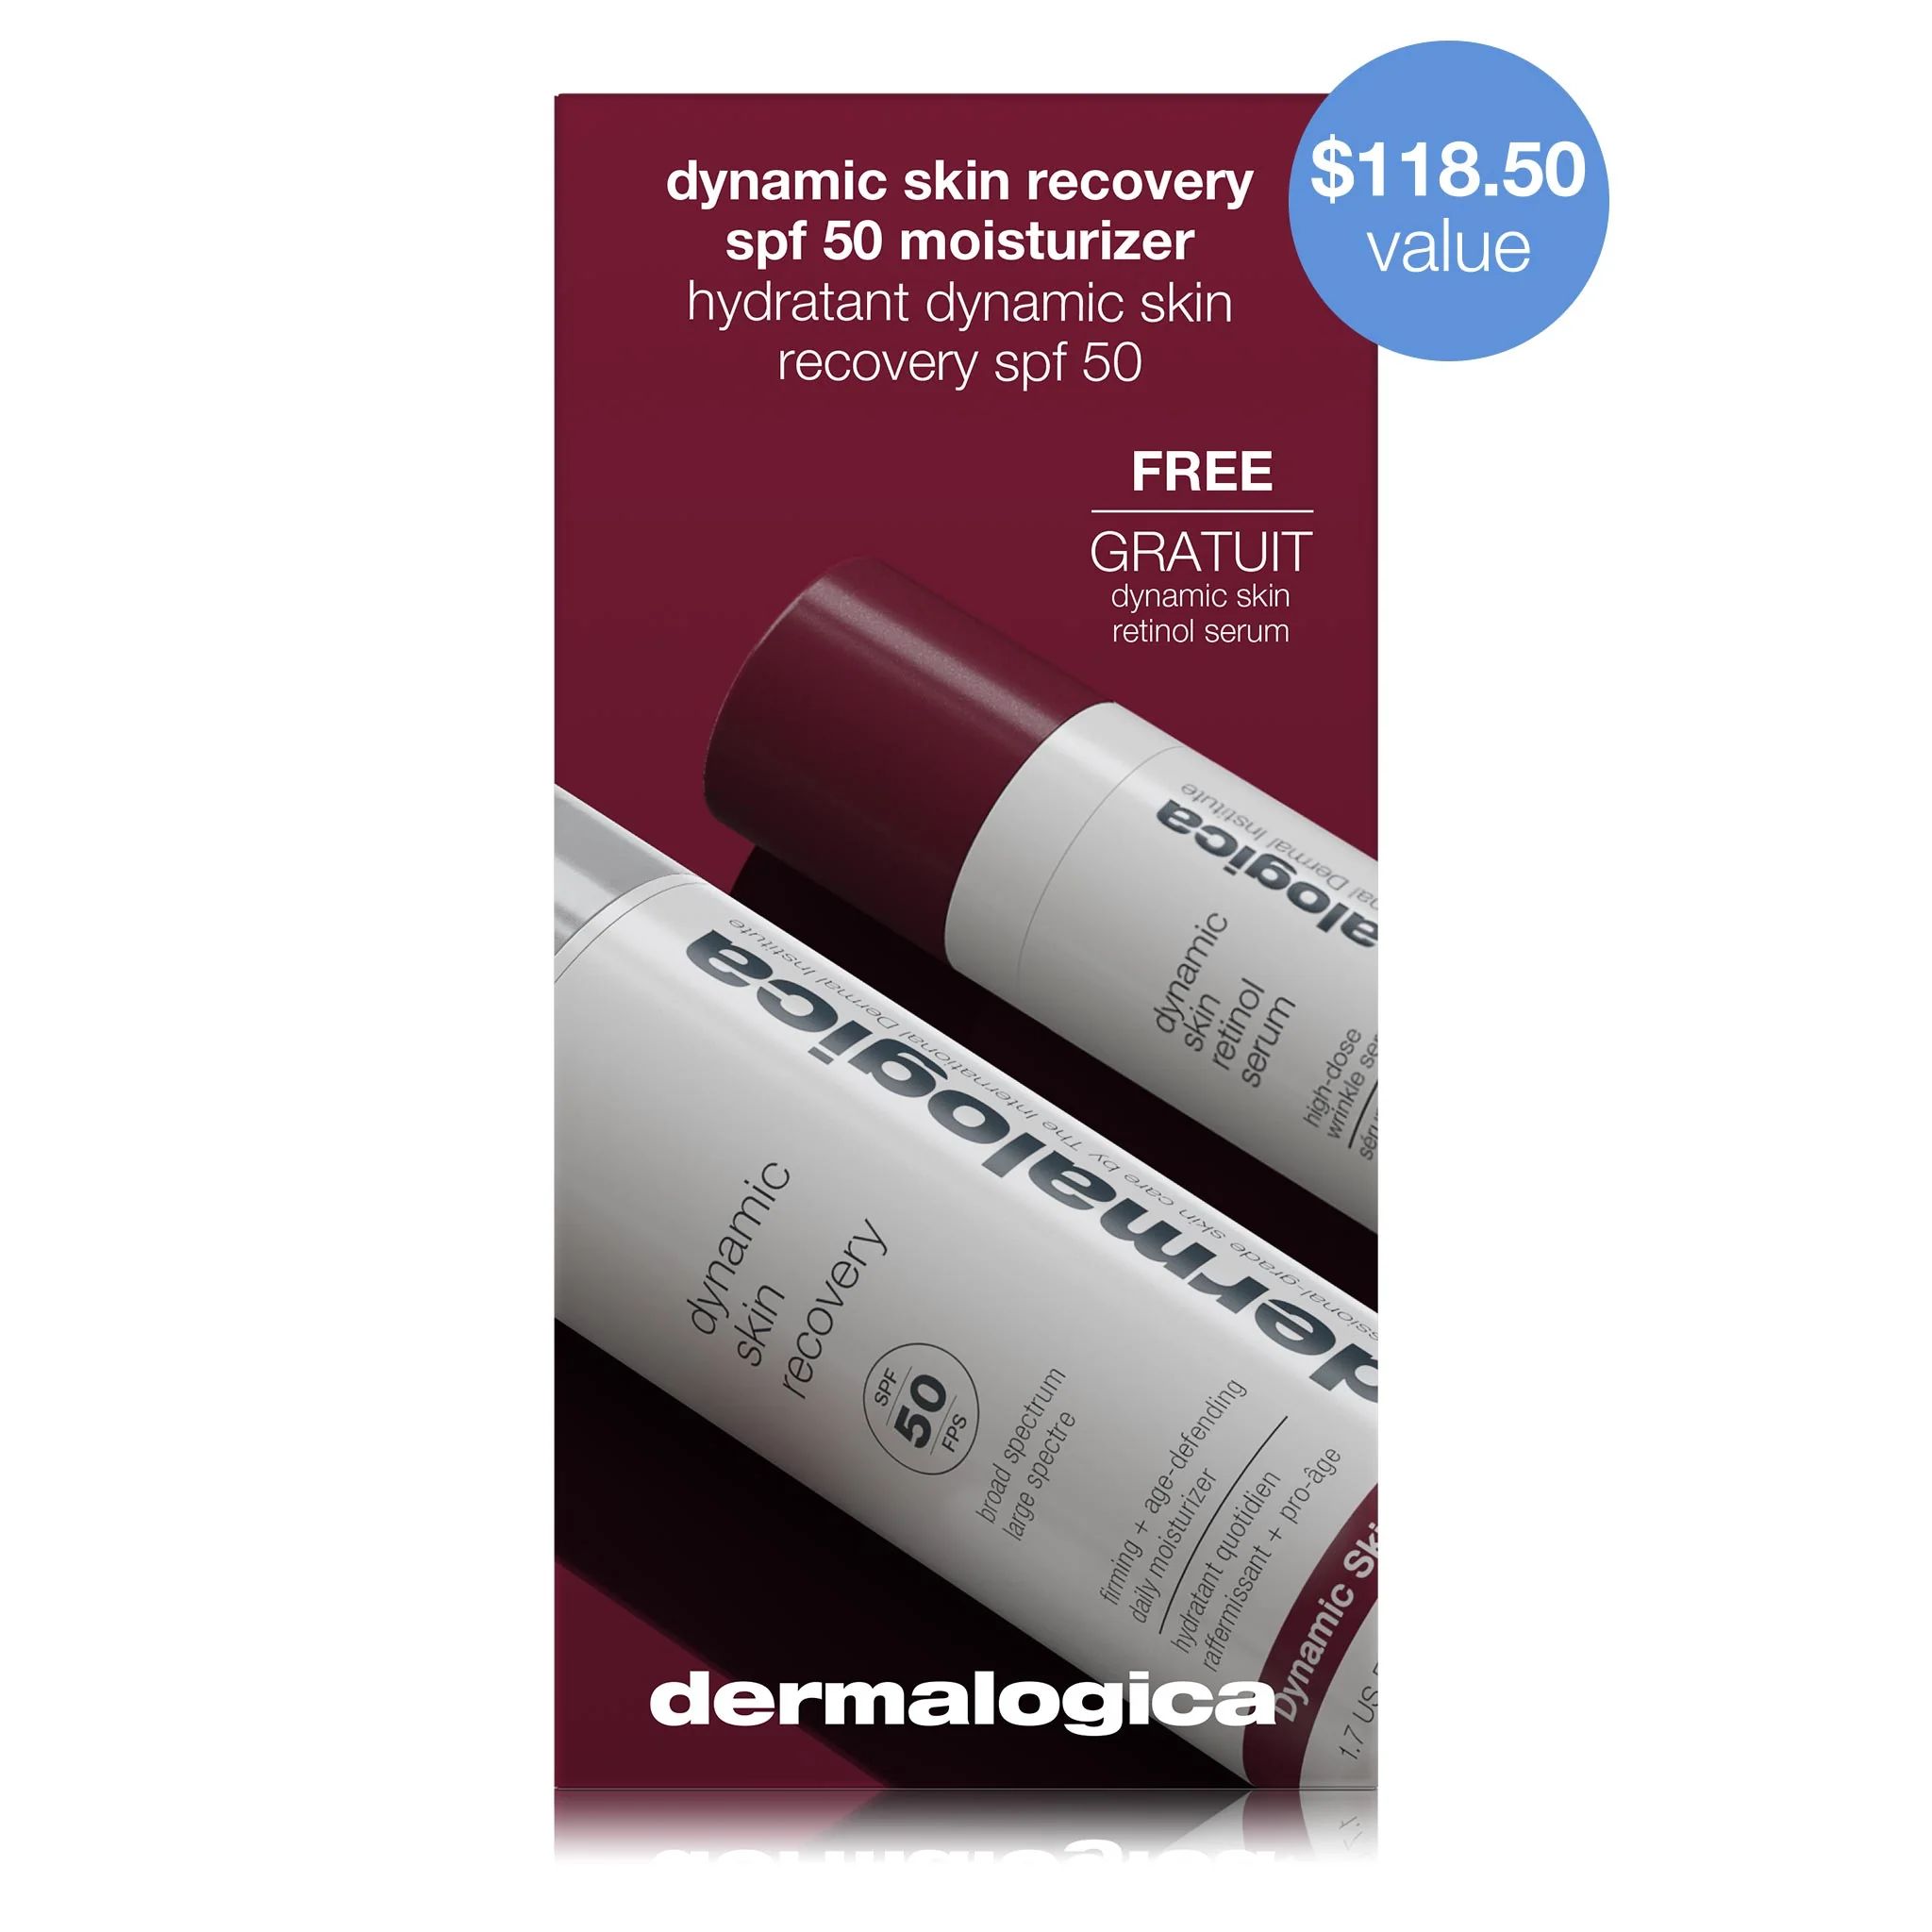 Dynamic Skin Recovery SPF50 Duo (1 full-size + free travel size) | Dermalogica® | Dermalogica (US)